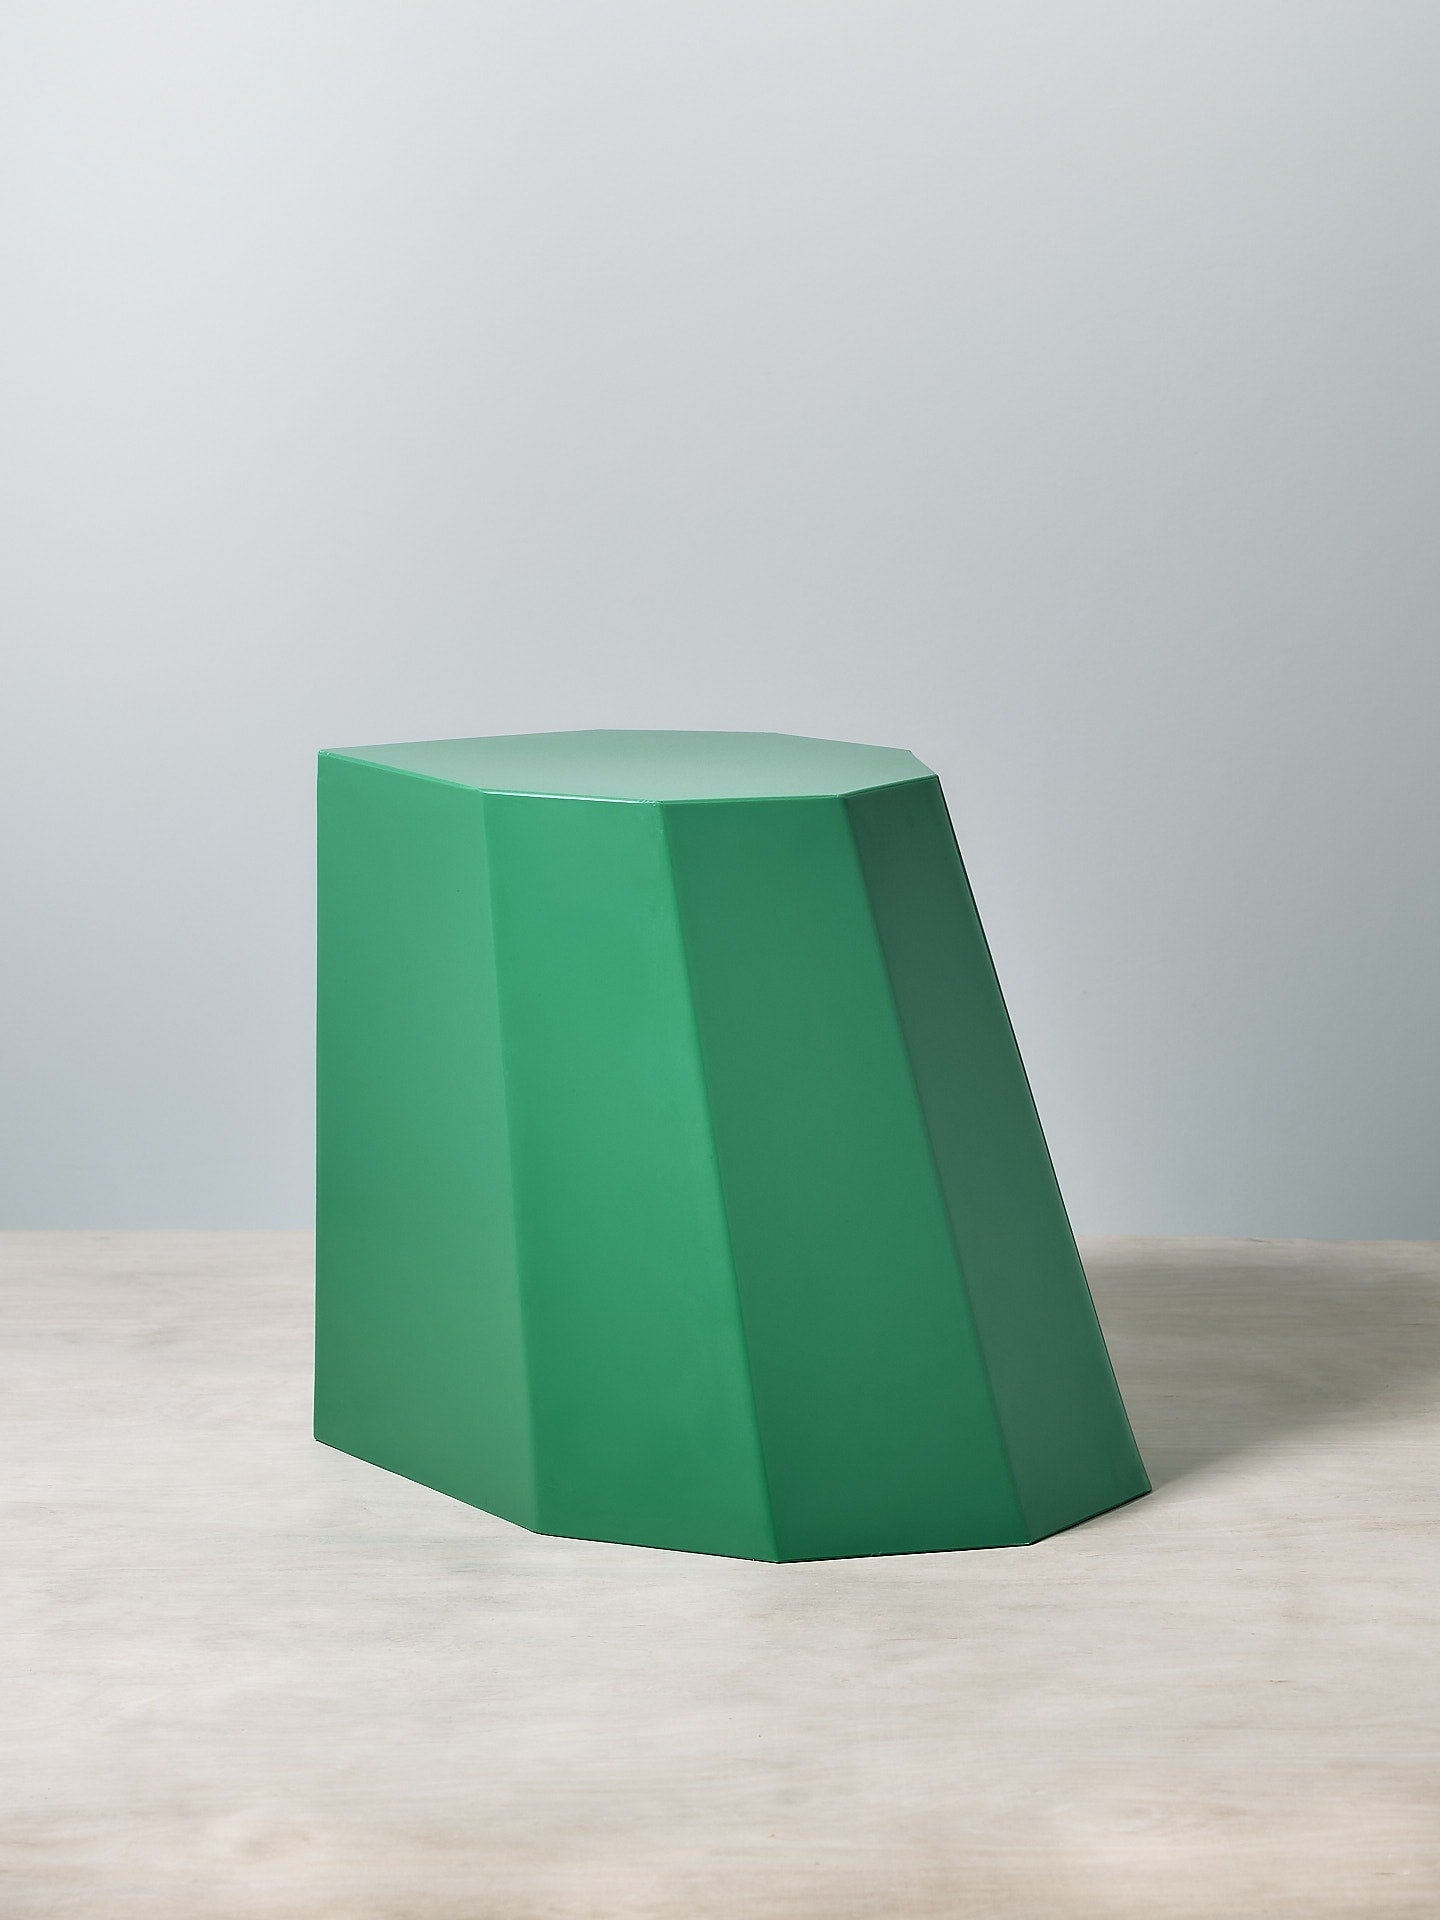 A Arnoldino Stool by Martino Gamper on a white table.